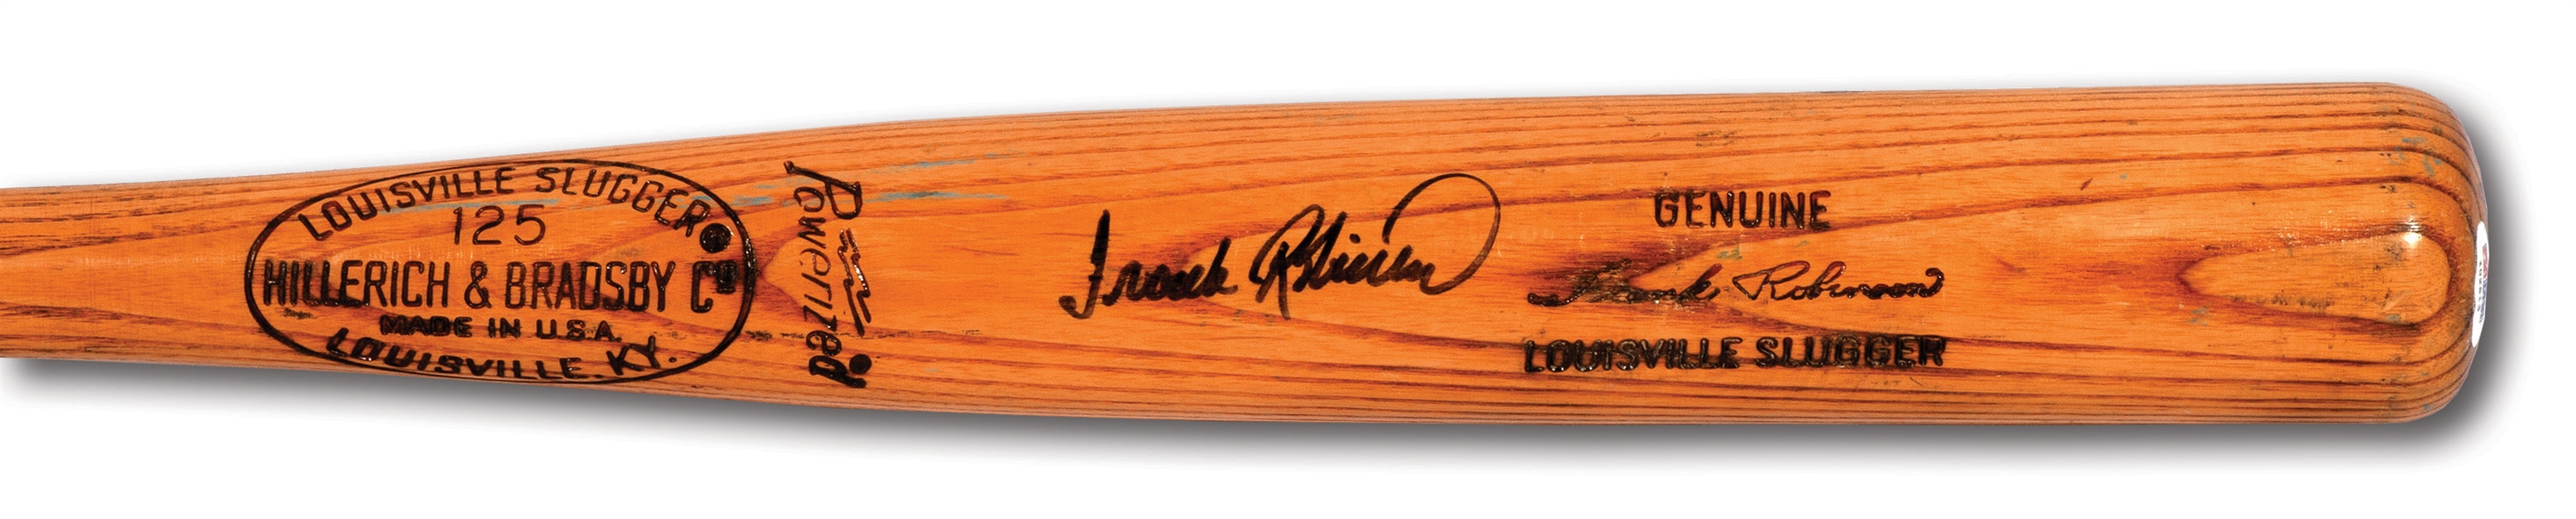 1974-75 FRANK ROBINSON AUTOGRAPHED HILLERICH & BRADSBY PROFESSIONAL MODEL R161 GAME USED BAT (PSA/DNA GU 8.5)